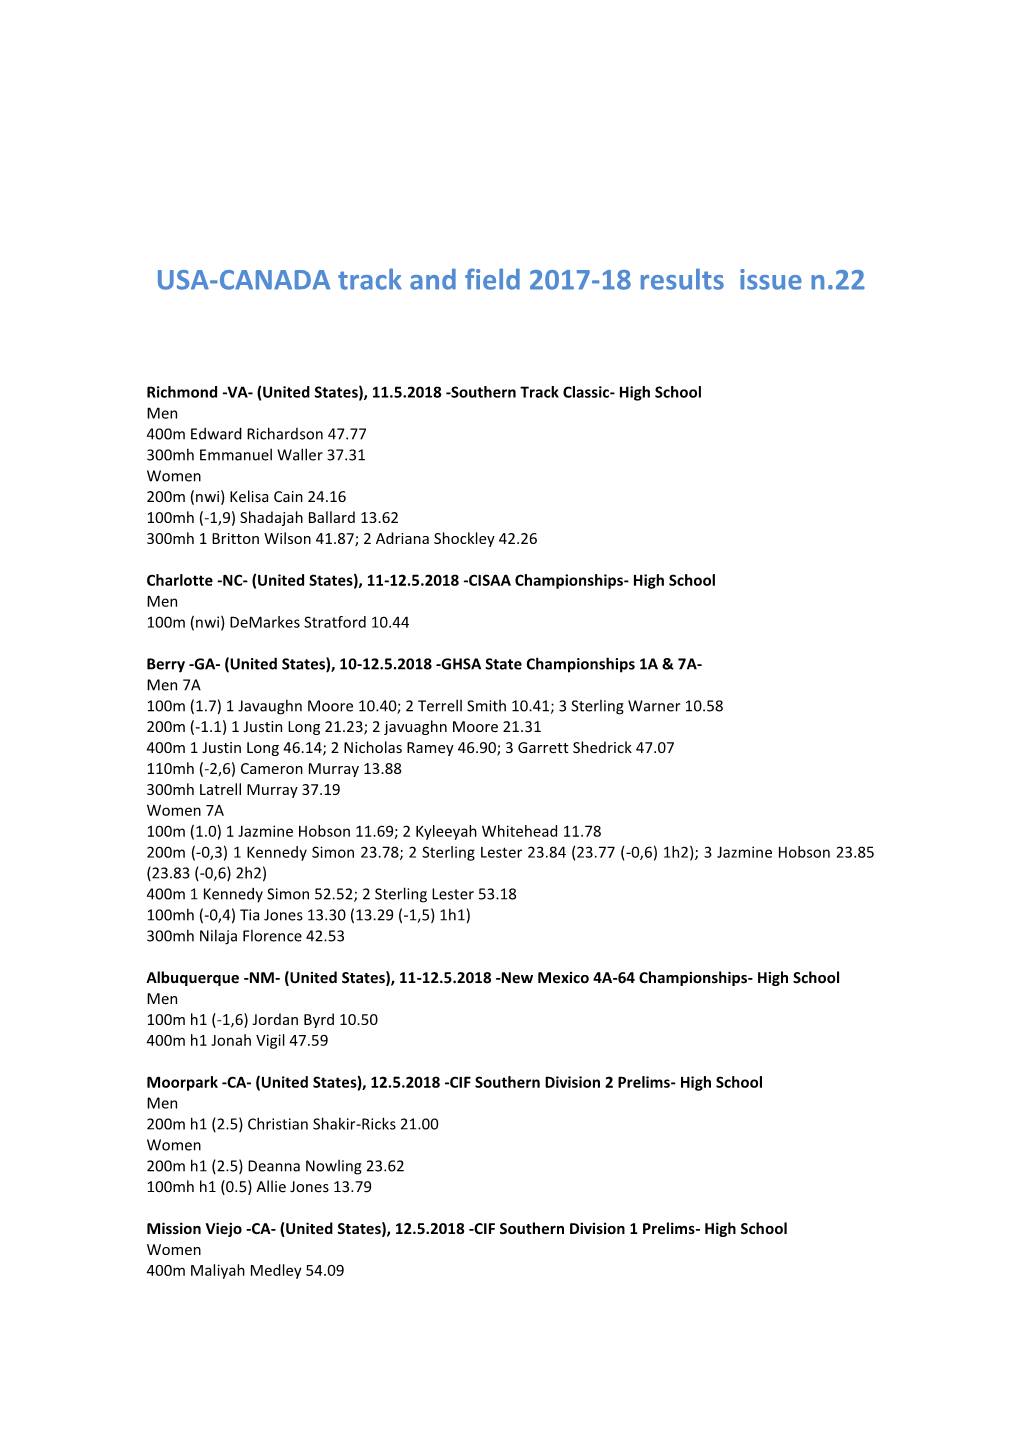 USA-CANADA Track and Field 2017-18 Results Issue N.22